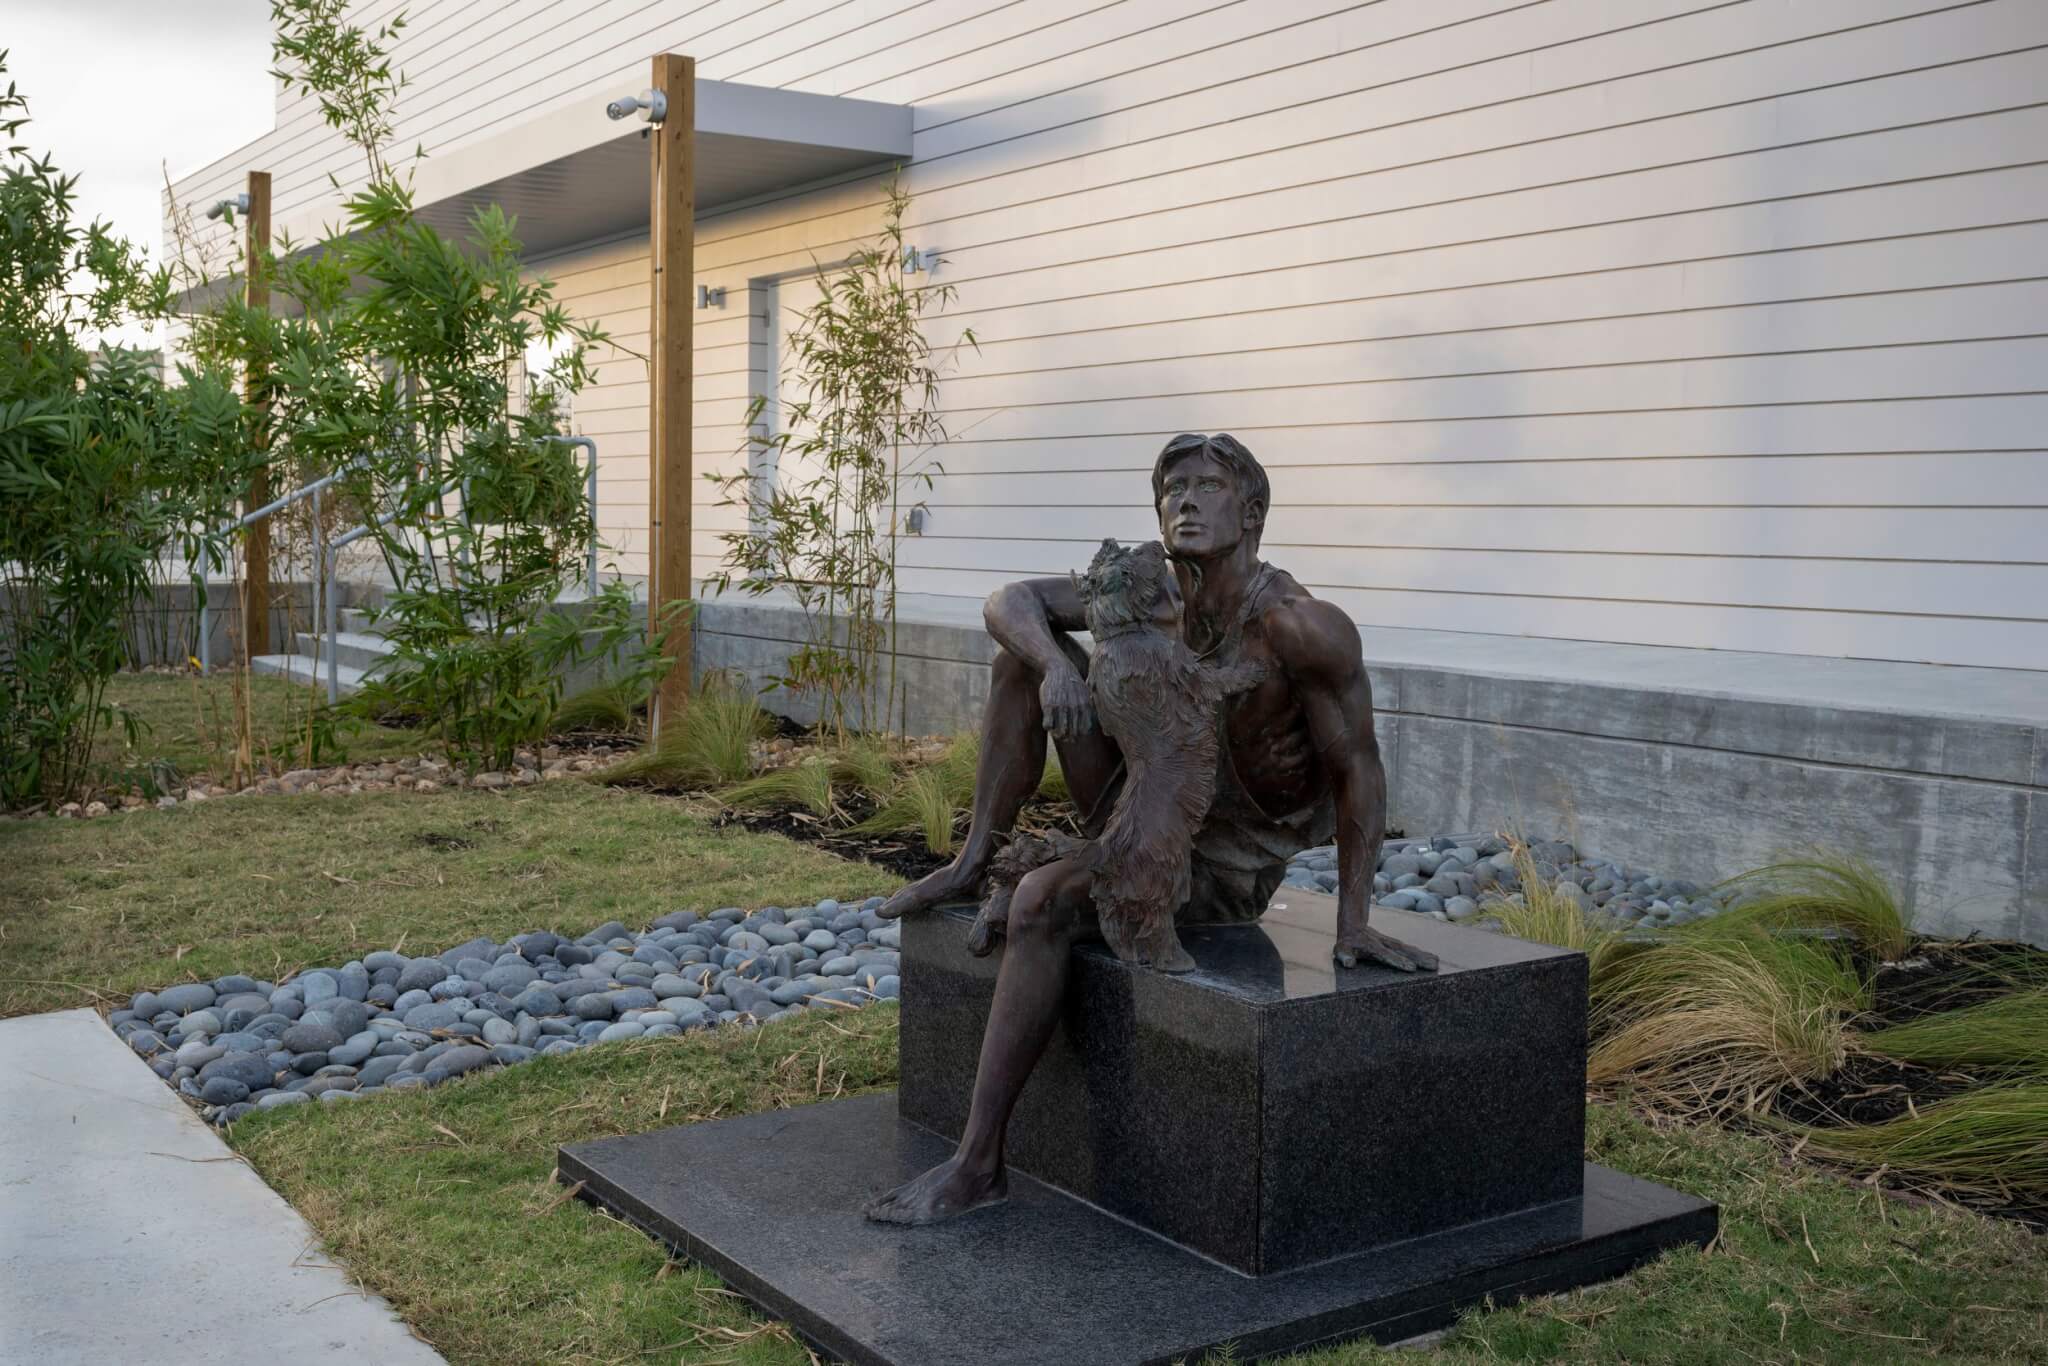 sculpture of sitting man with dog in a garden